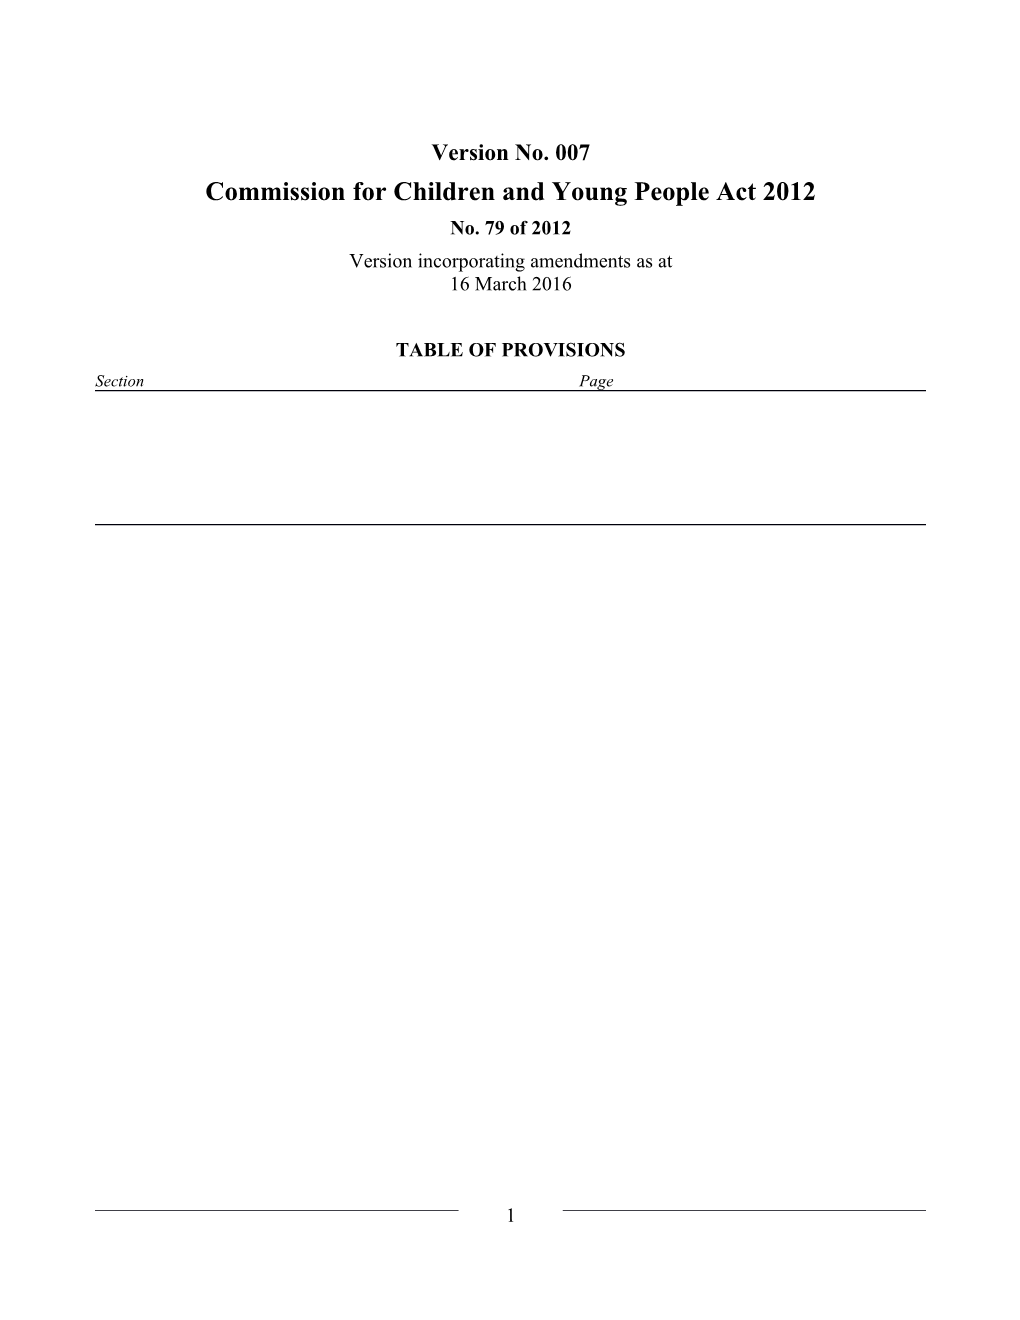 Commission for Children and Young People Act 2012